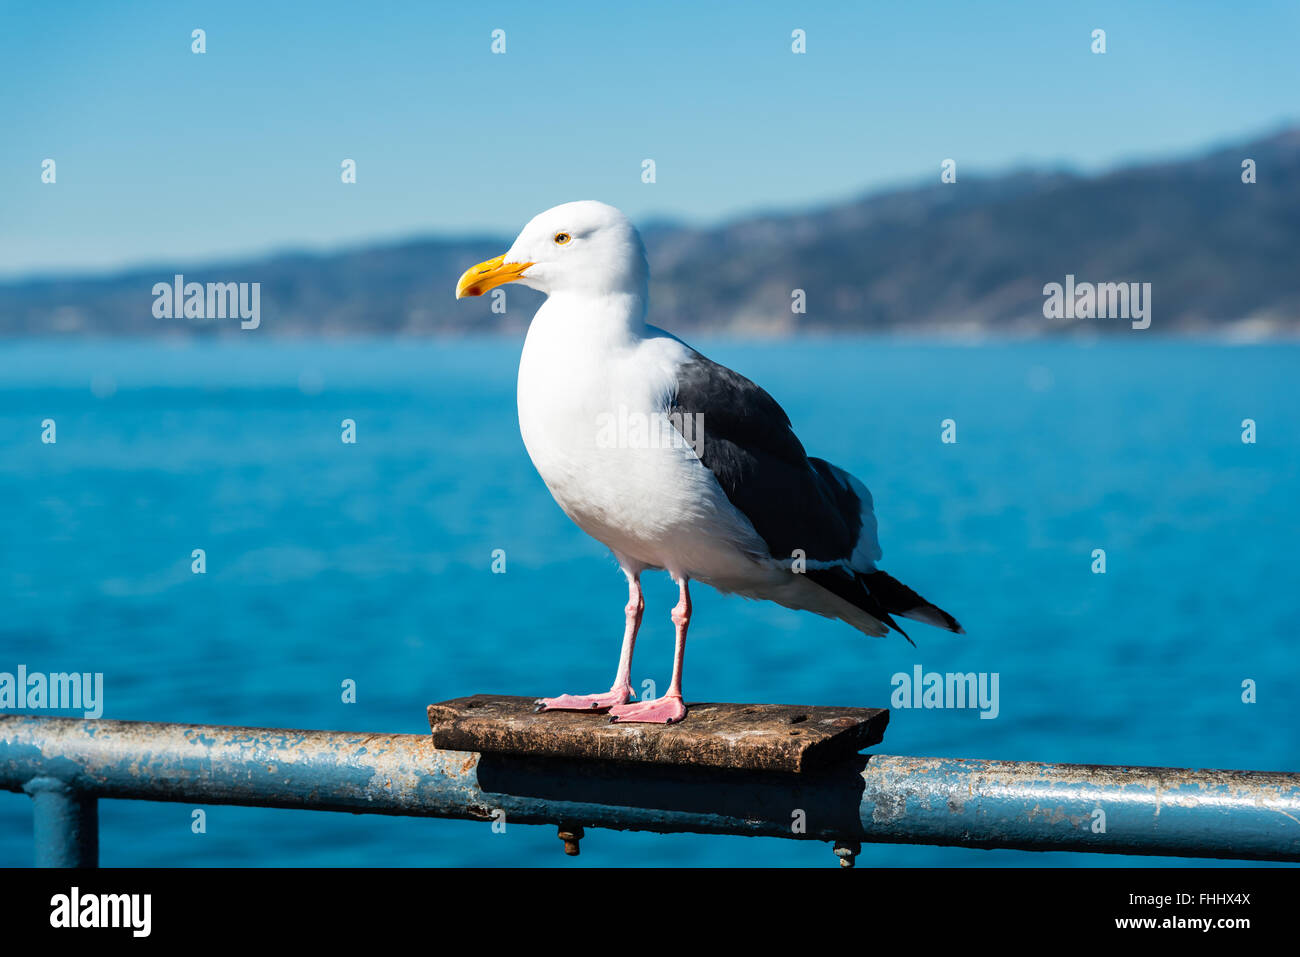 seagull sitting on a rail at the beach Stock Photo